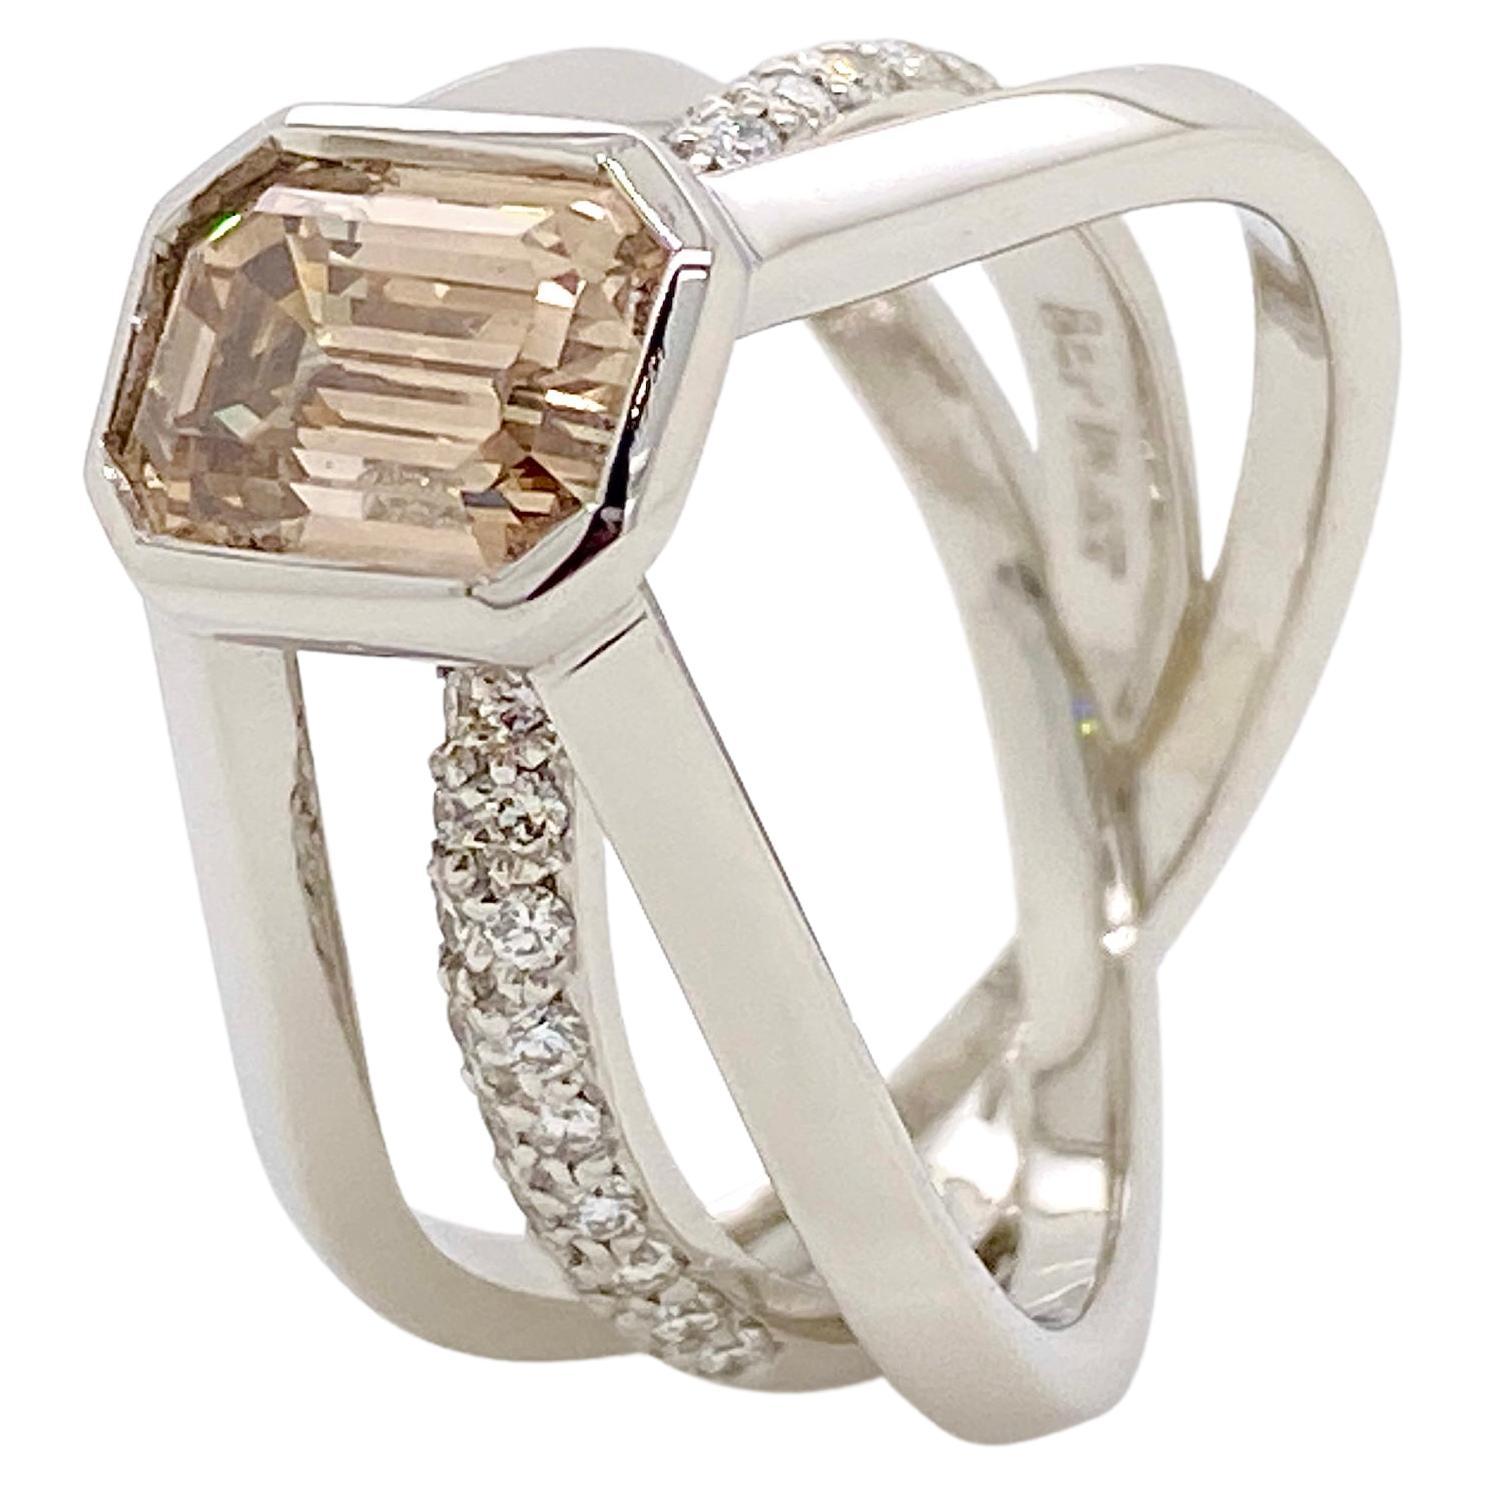 Champagne for two.
When designing and making special Creations we often take inspiration from the centrepiece gem itself to decide on the design. Typically the emerald cut has clean crisp, open lines and the simplicity of the cut is matched by no